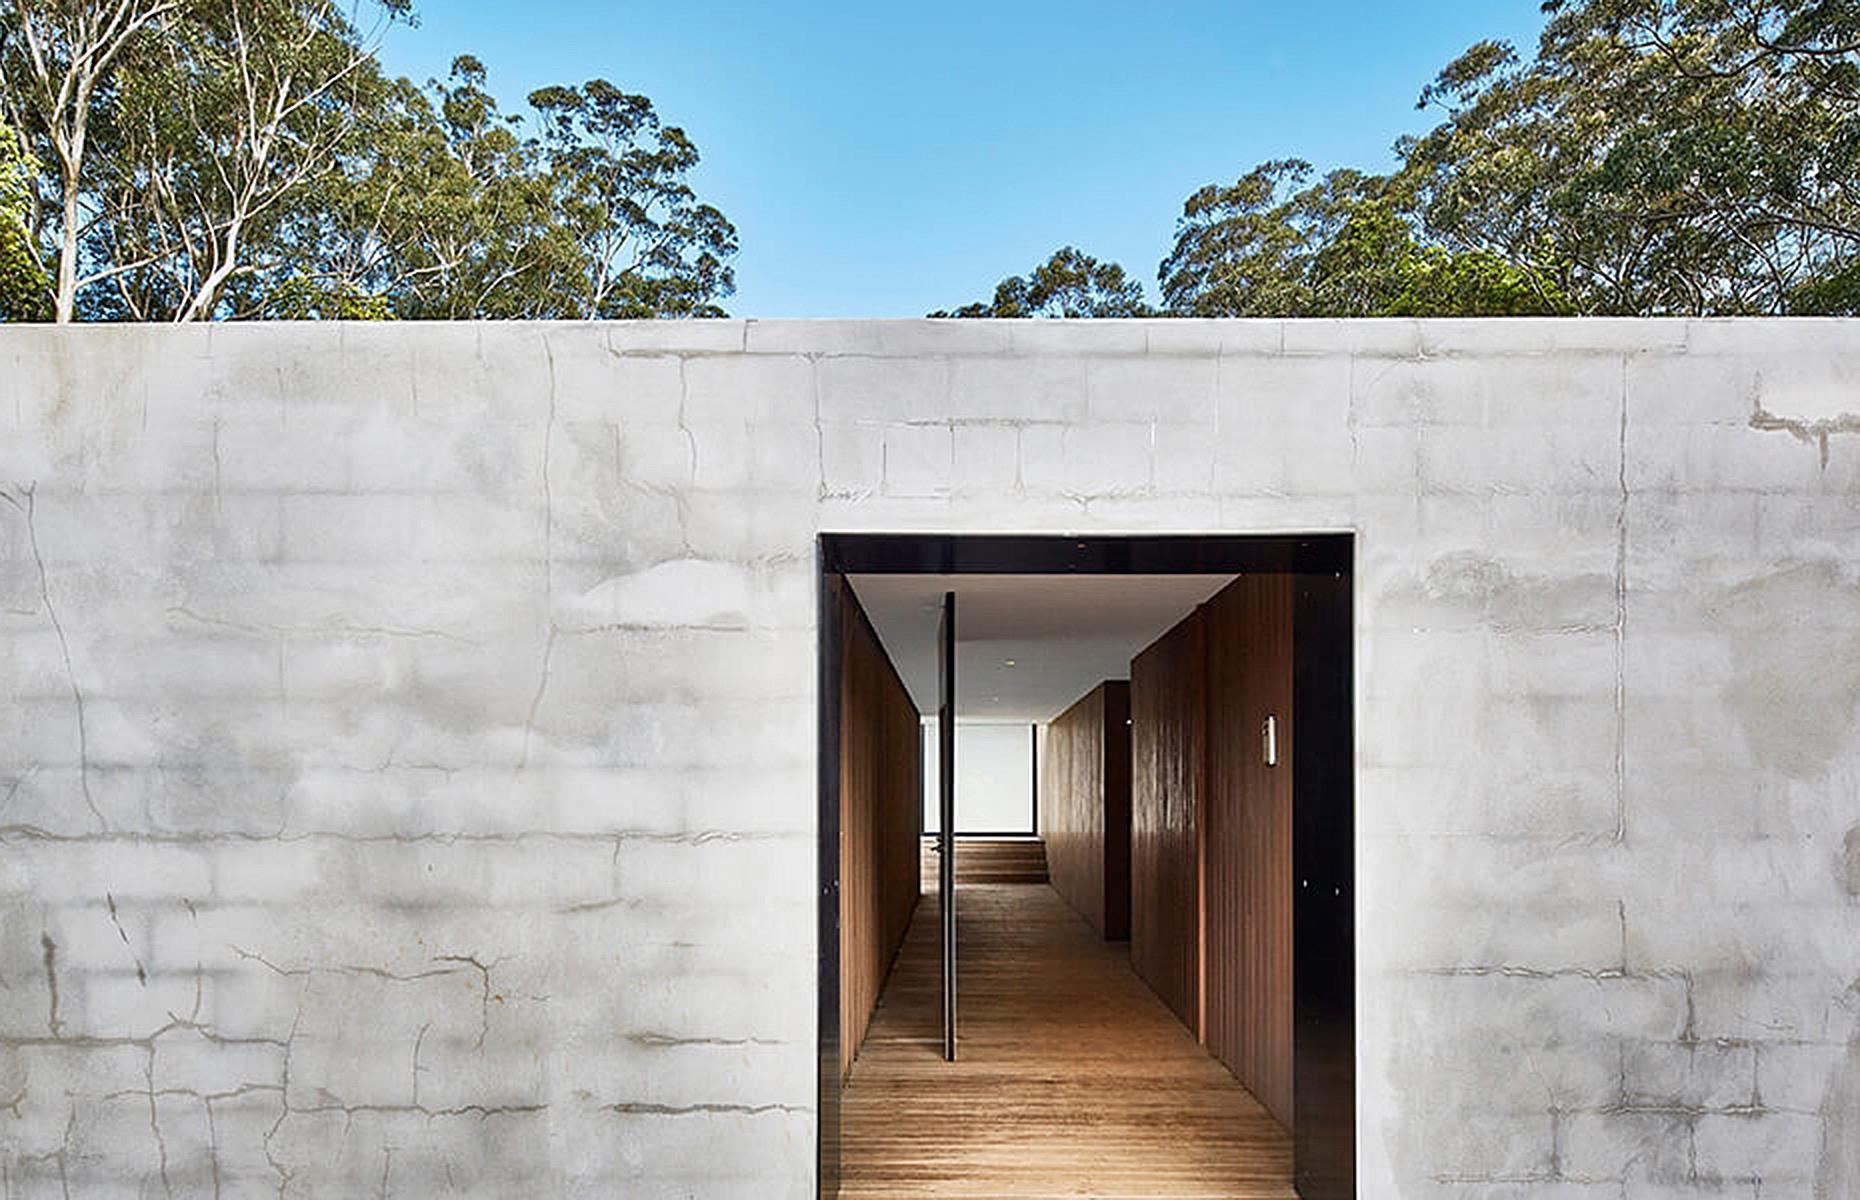 <p>Built by architectural firm <a href="https://www.modscape.com.au/">Modscape</a>, the incredible modular home was designed to be a secret haven from the outside world. </p>  <p>Visitors have to pass through a secret pivoting door in the brick wall to gain access to the hidden property. A timber-lined inner walkway leads to the main living areas, which feature double-height ceilings and warm wood across the floor and walls.</p>